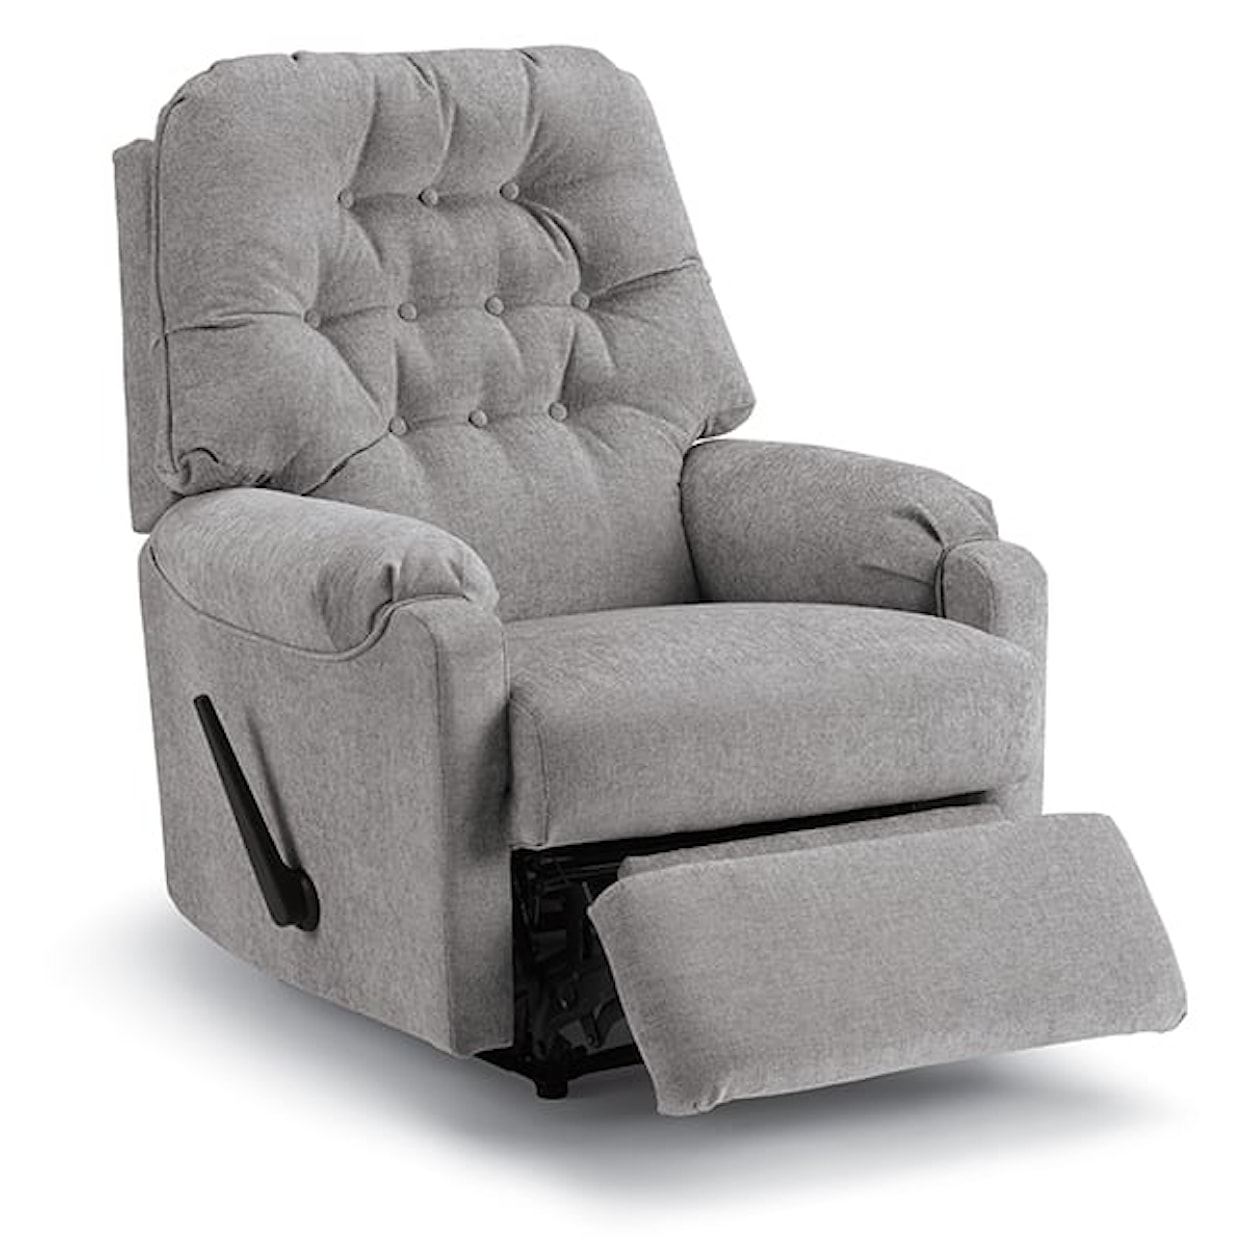 Best Home Furnishings Petite Recliners Space Saver Recliner